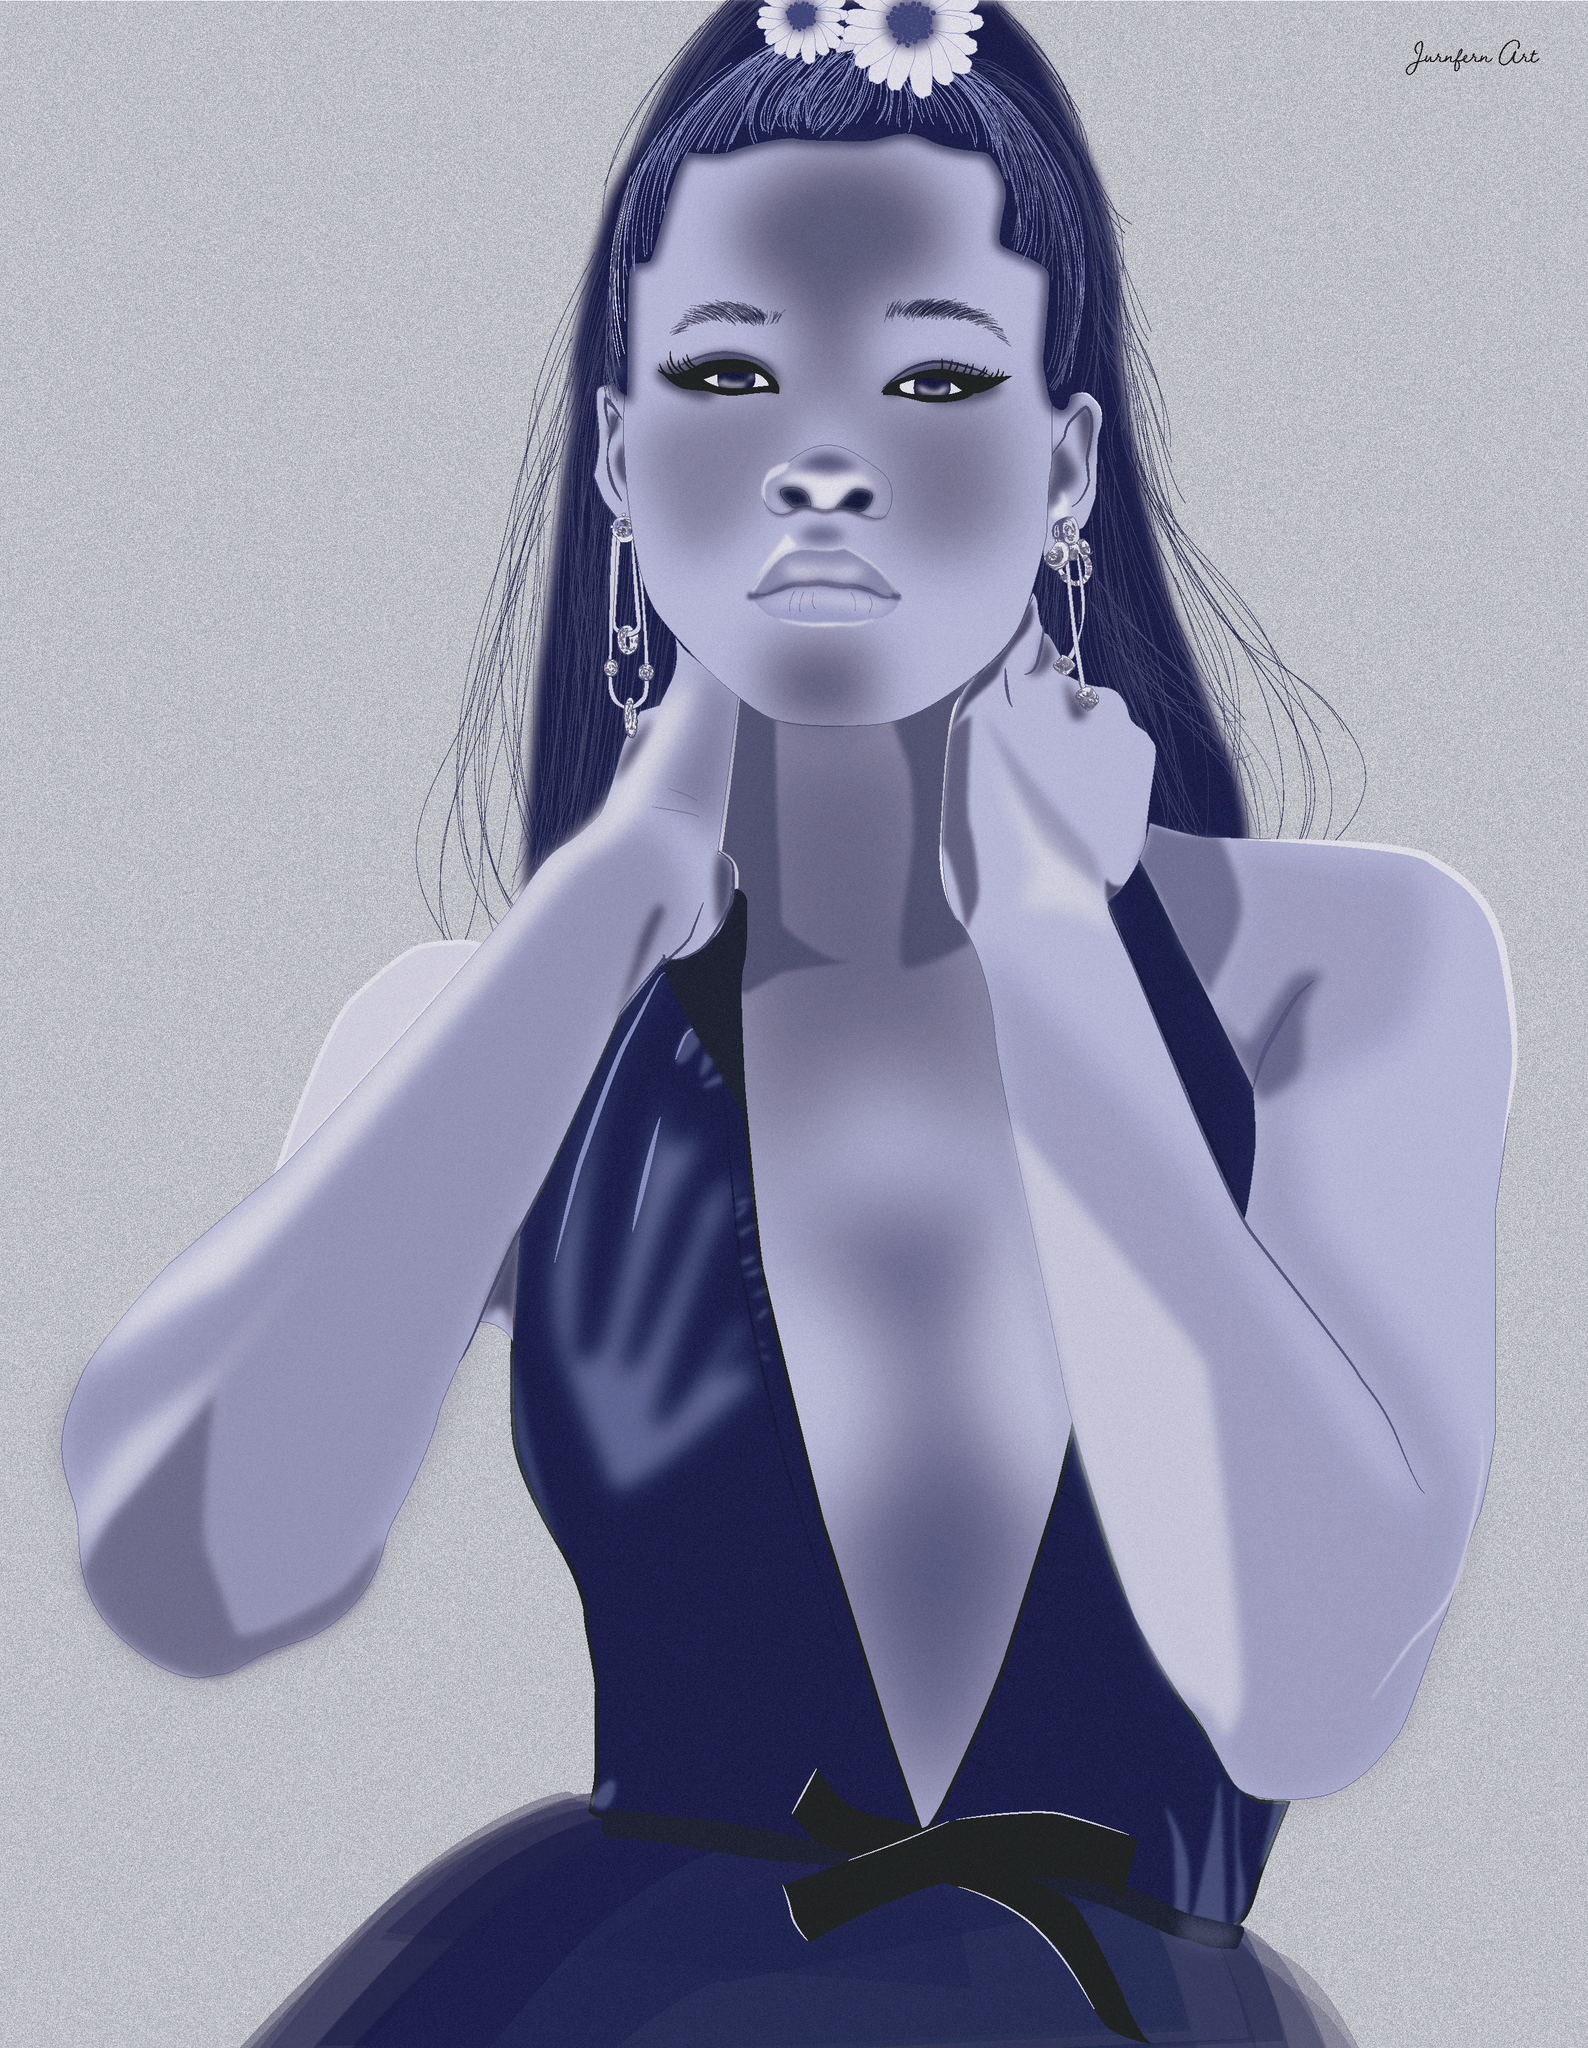 An illustration print with a gray background and a blue graphic illustration of actress Storm Reid wearing a deep V-neck dress and flowers in her hair